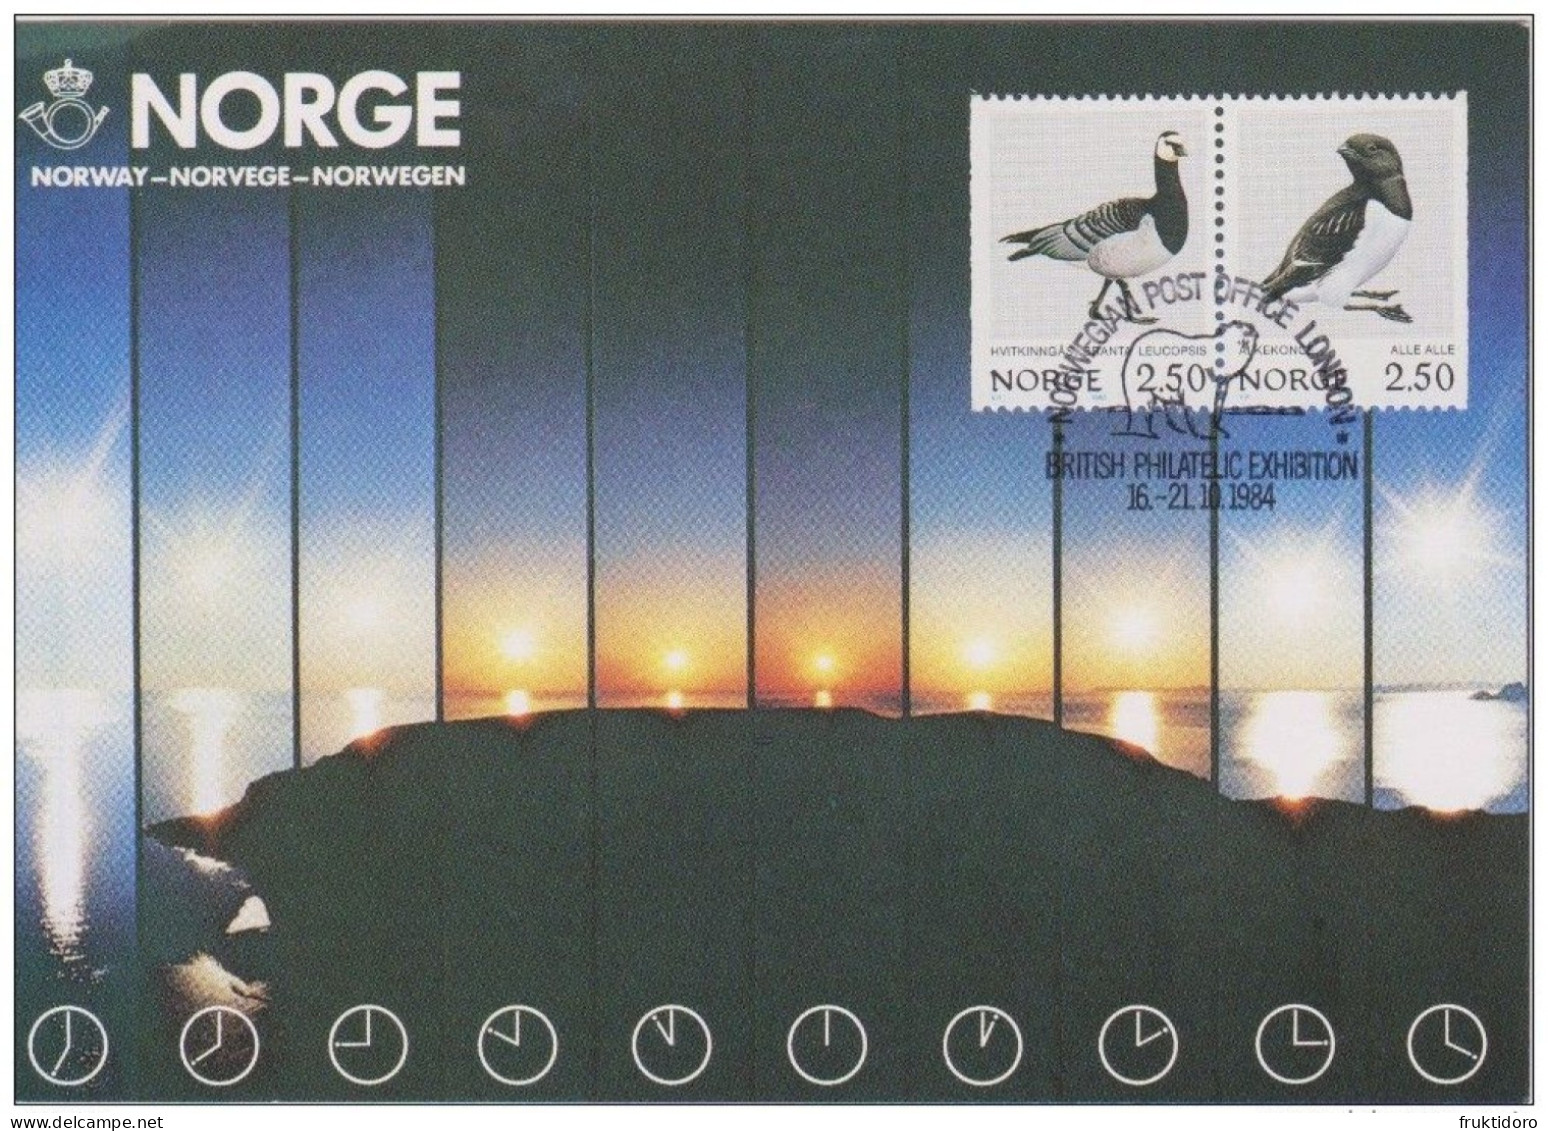 Norway Exhibition Cards 1984 With Mi 883-884 Birds - Barnacle Goose - Branta Leucopsis - Little Auk - Collections